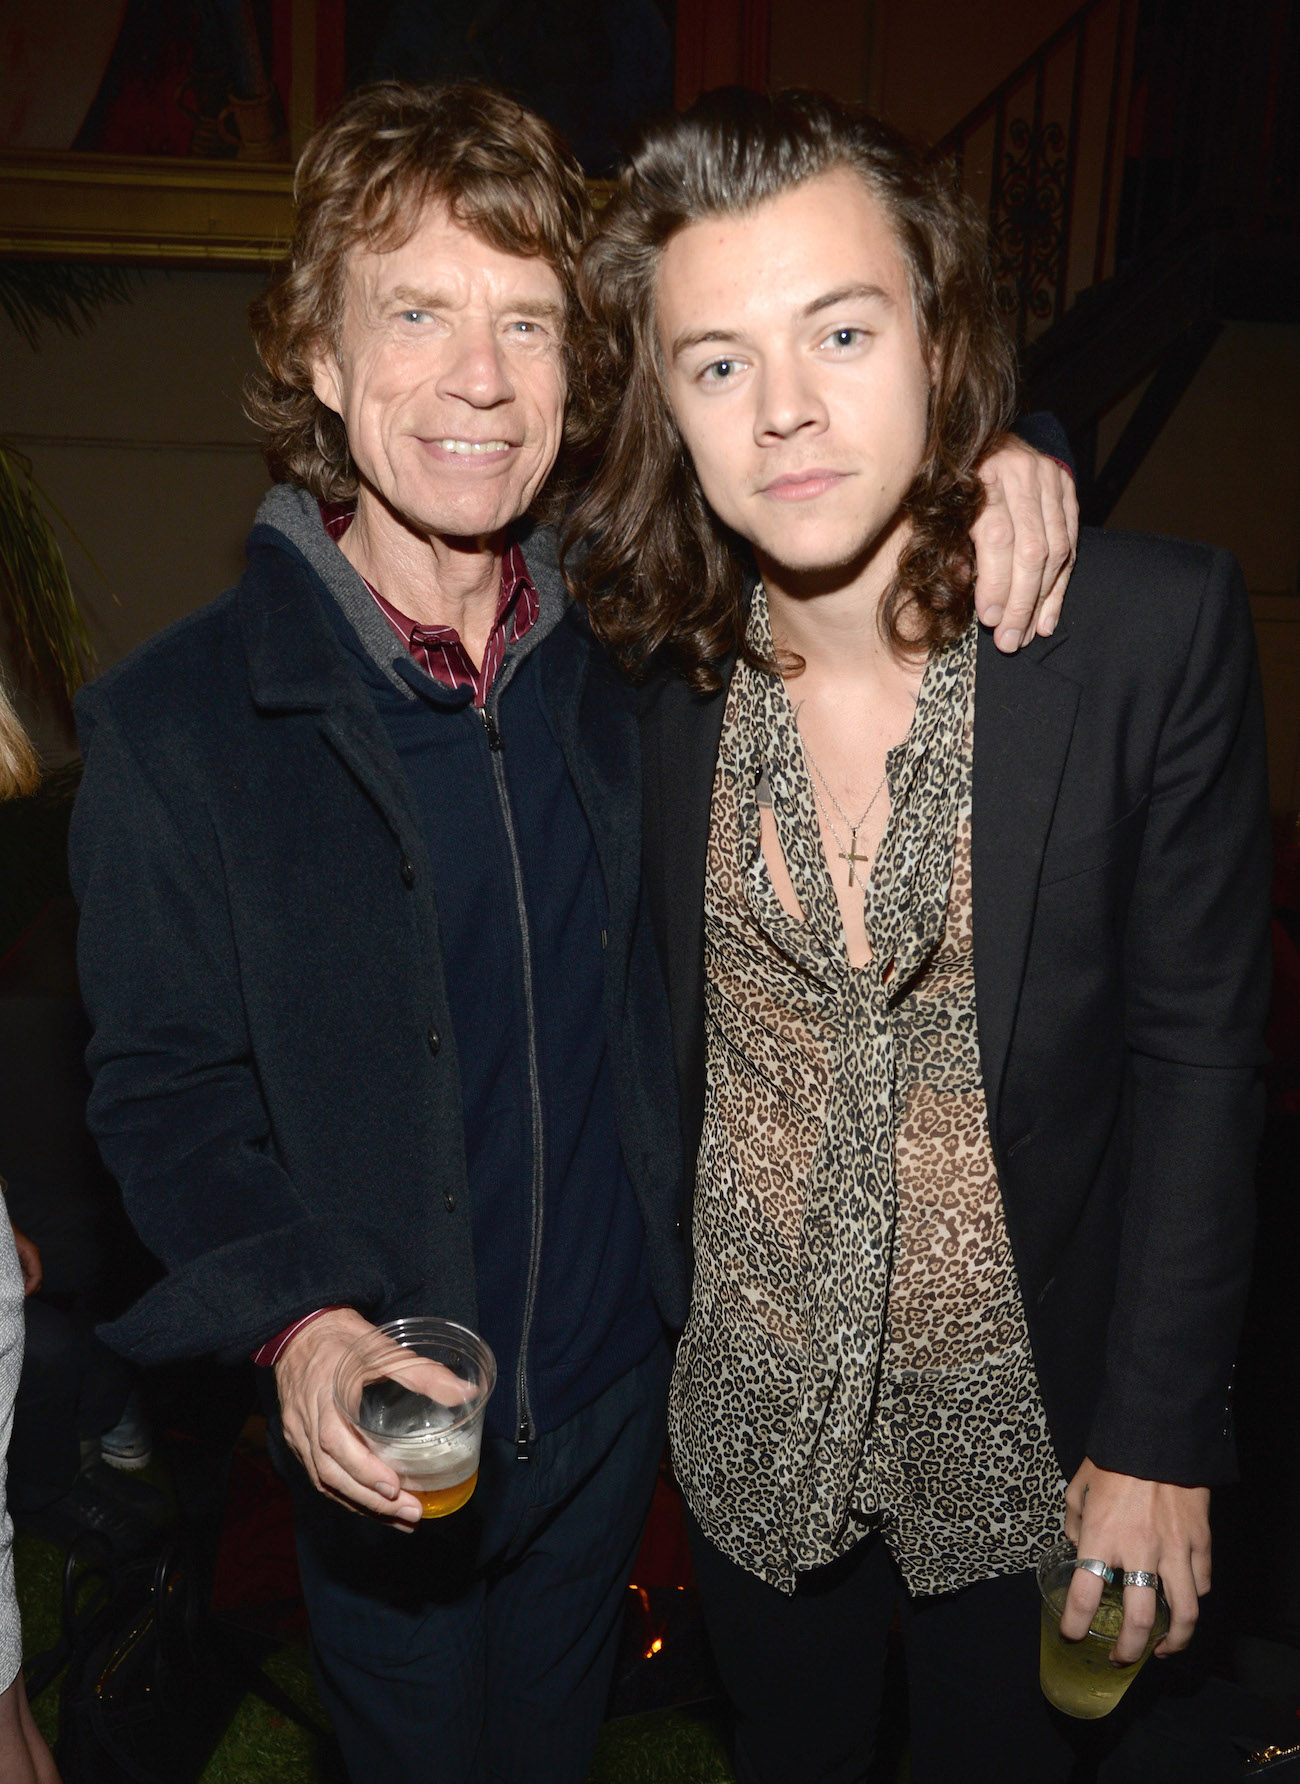 Mick Jagger and Harry Styles at The Rolling Stones' Los Angeles Club Show after party in 2015.